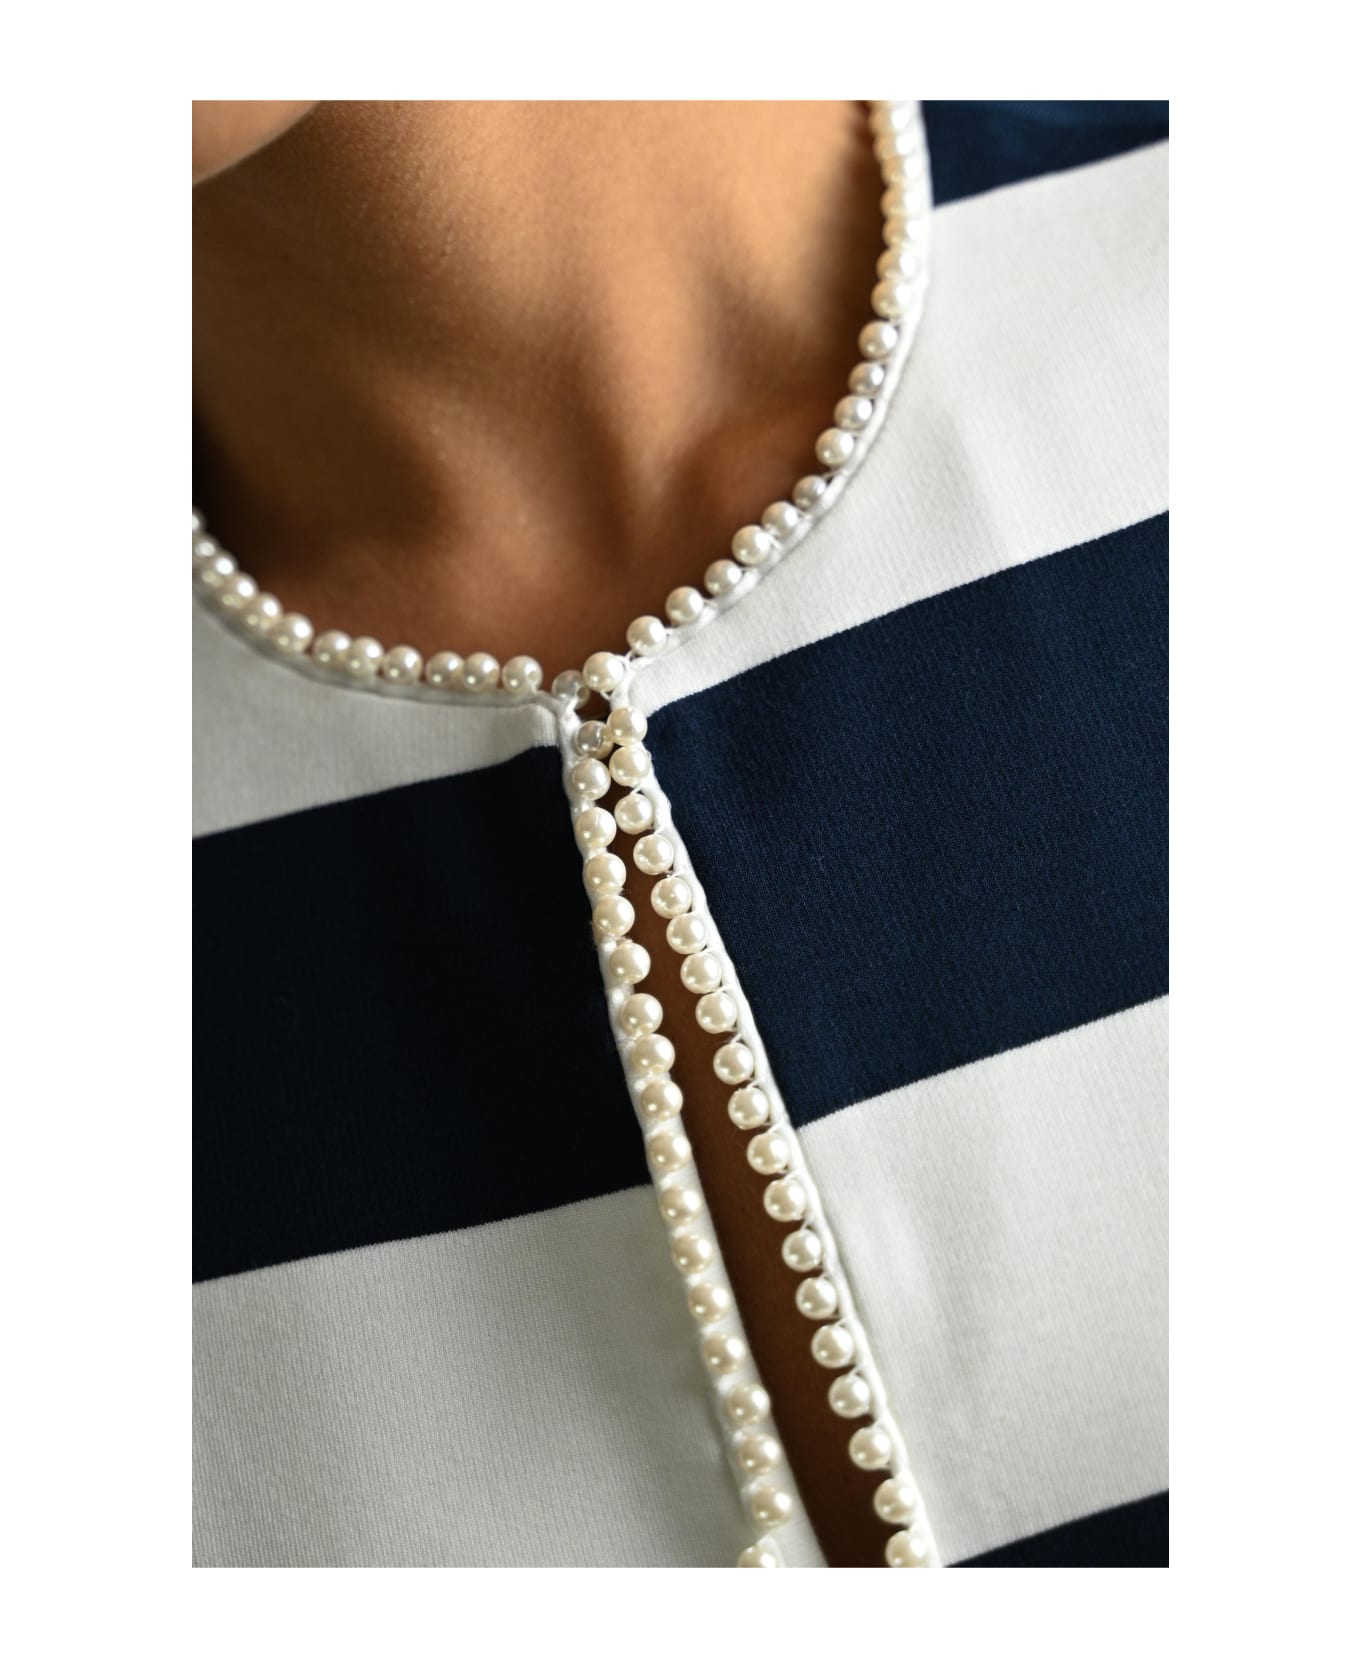 TwinSet Striped Jacket With Pearls - Blue